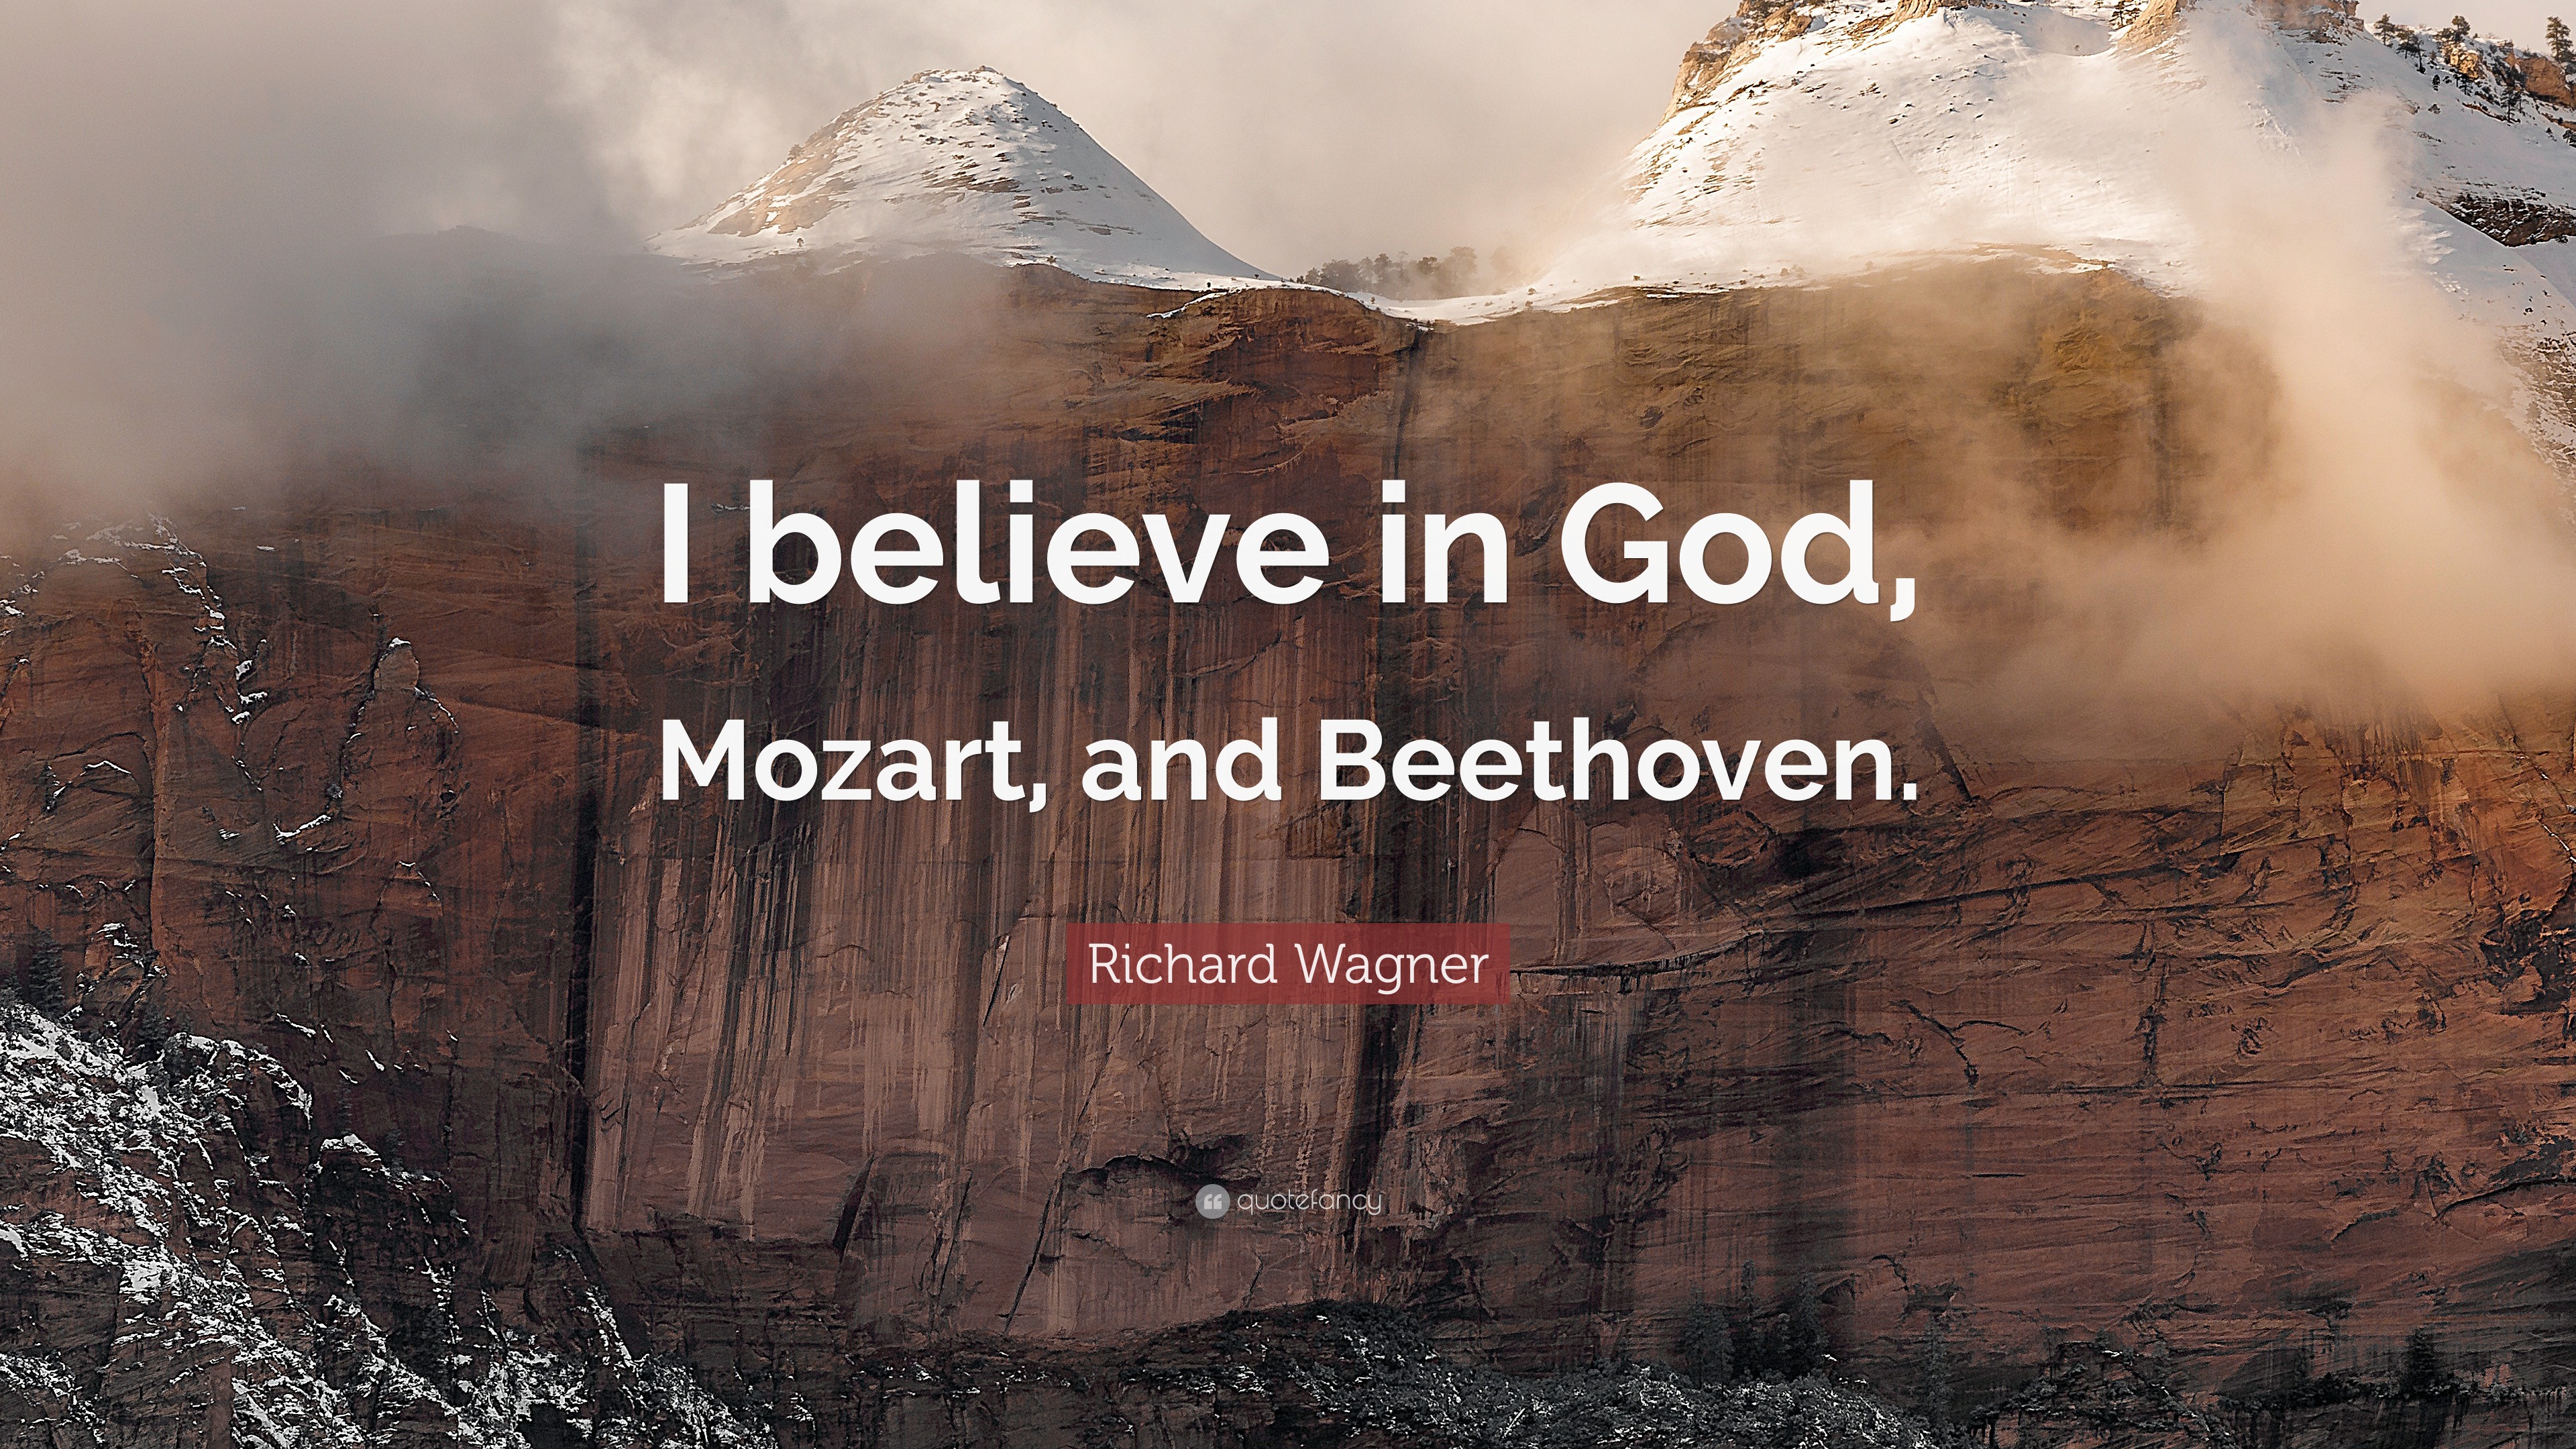 Richard Wagner Quote: “I believe in God, Mozart, and Beethoven.”